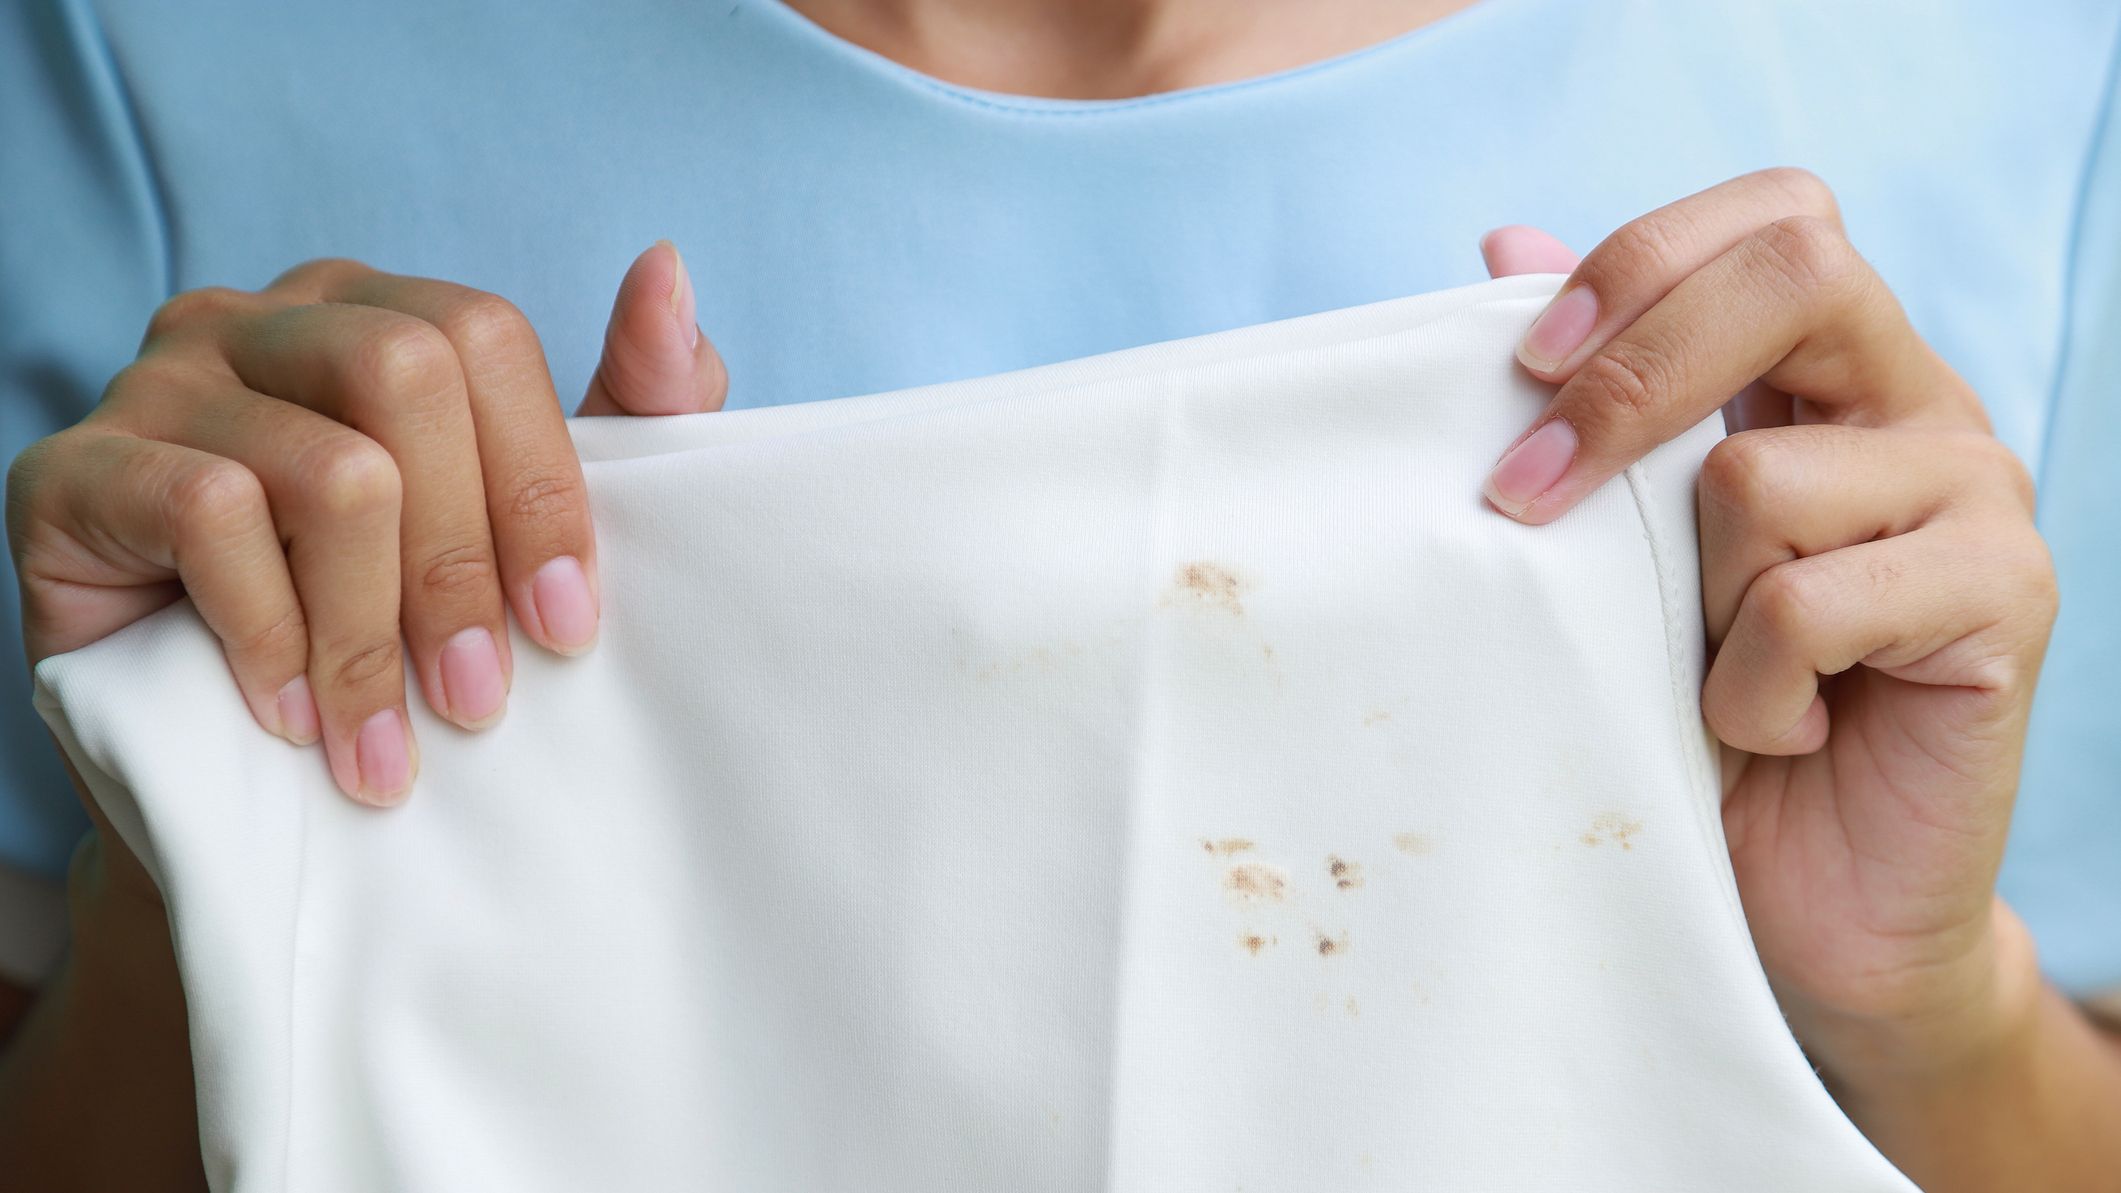 How to Remove Stains From Clothes At Home Better Than The Dry